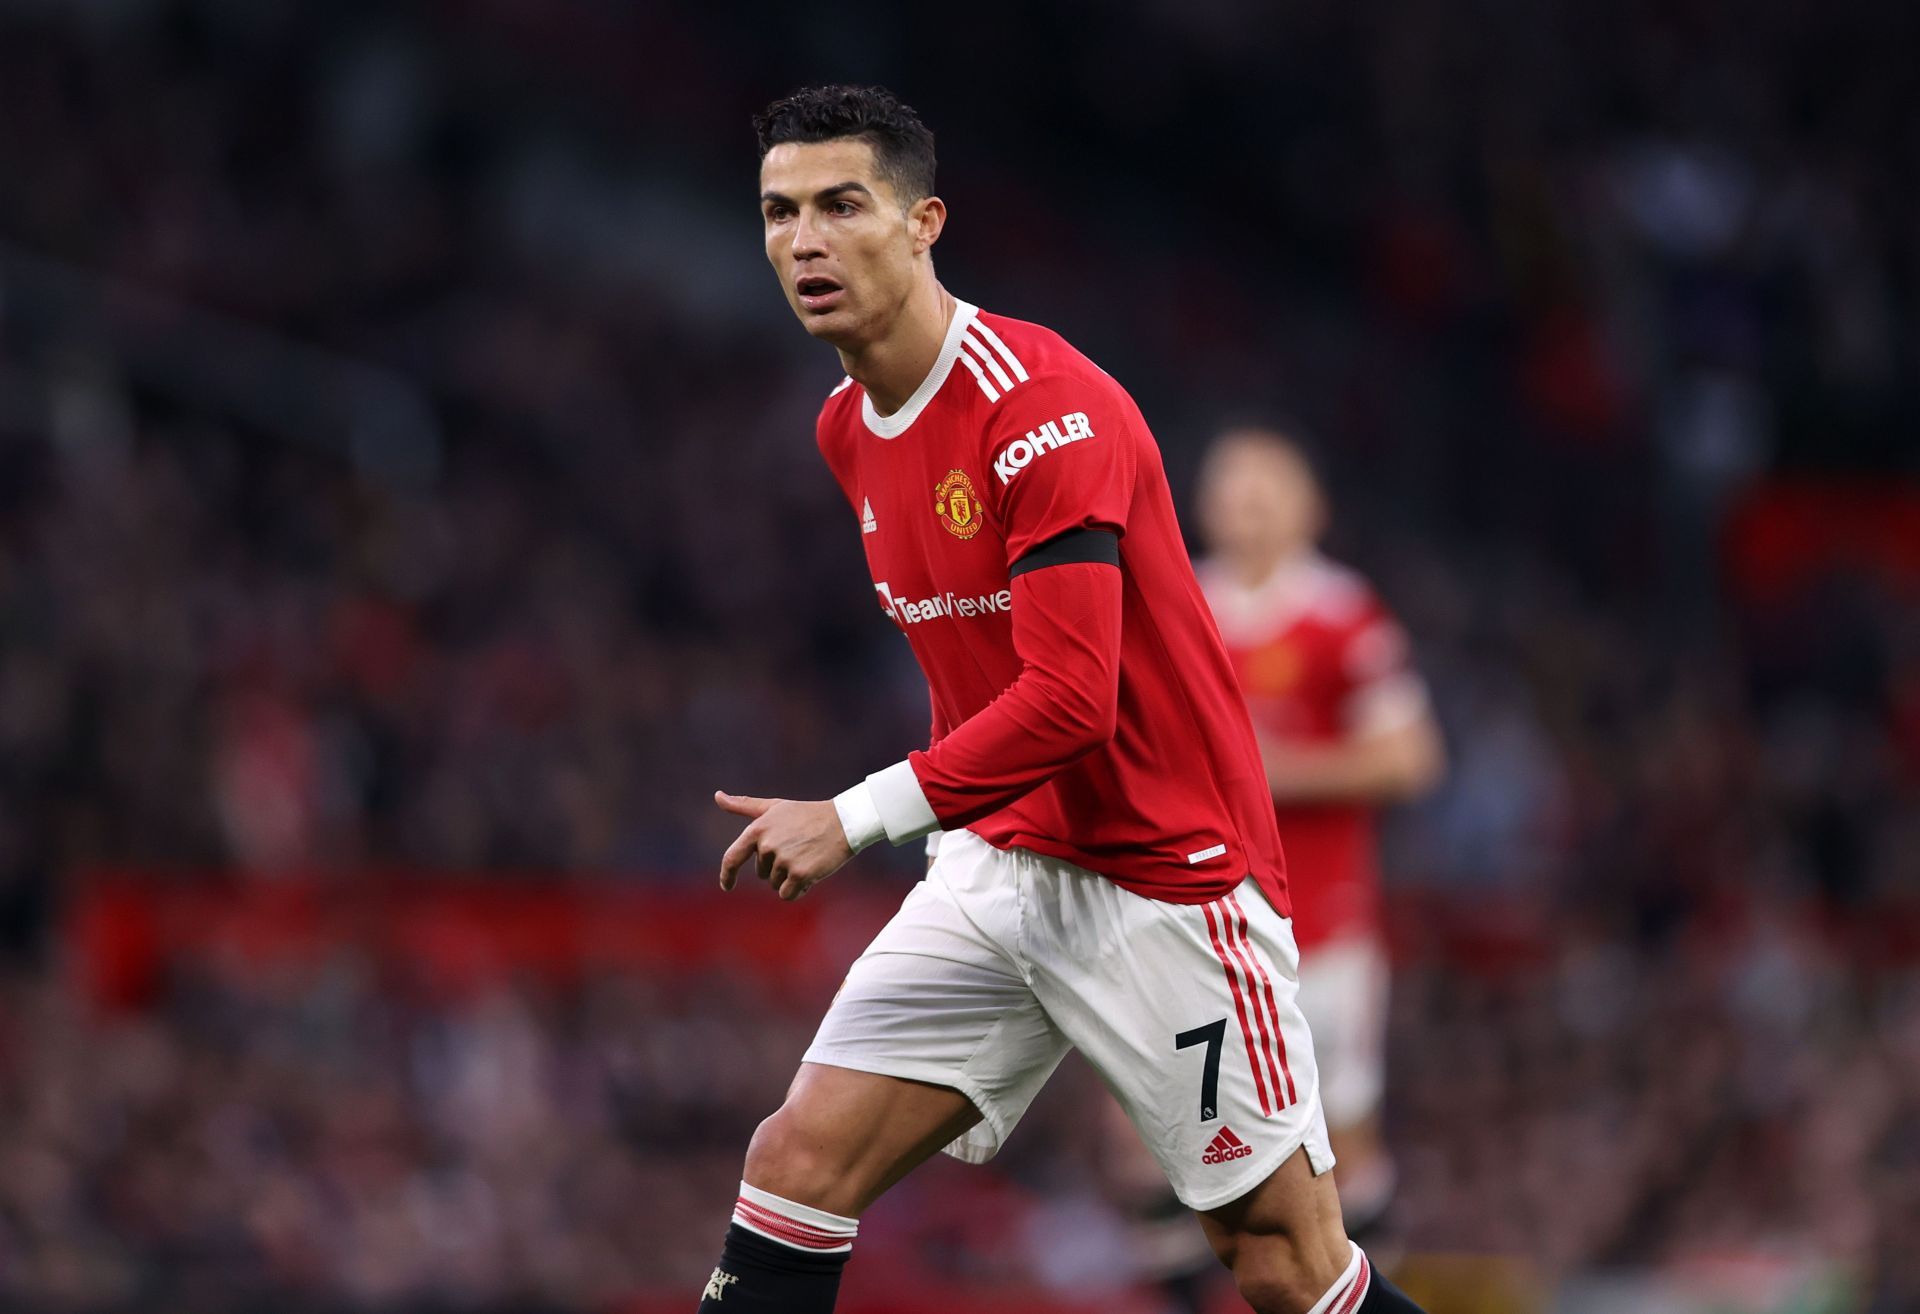 Despite United&#039;s woeful campaign, Cristiano Ronaldo has been at his best